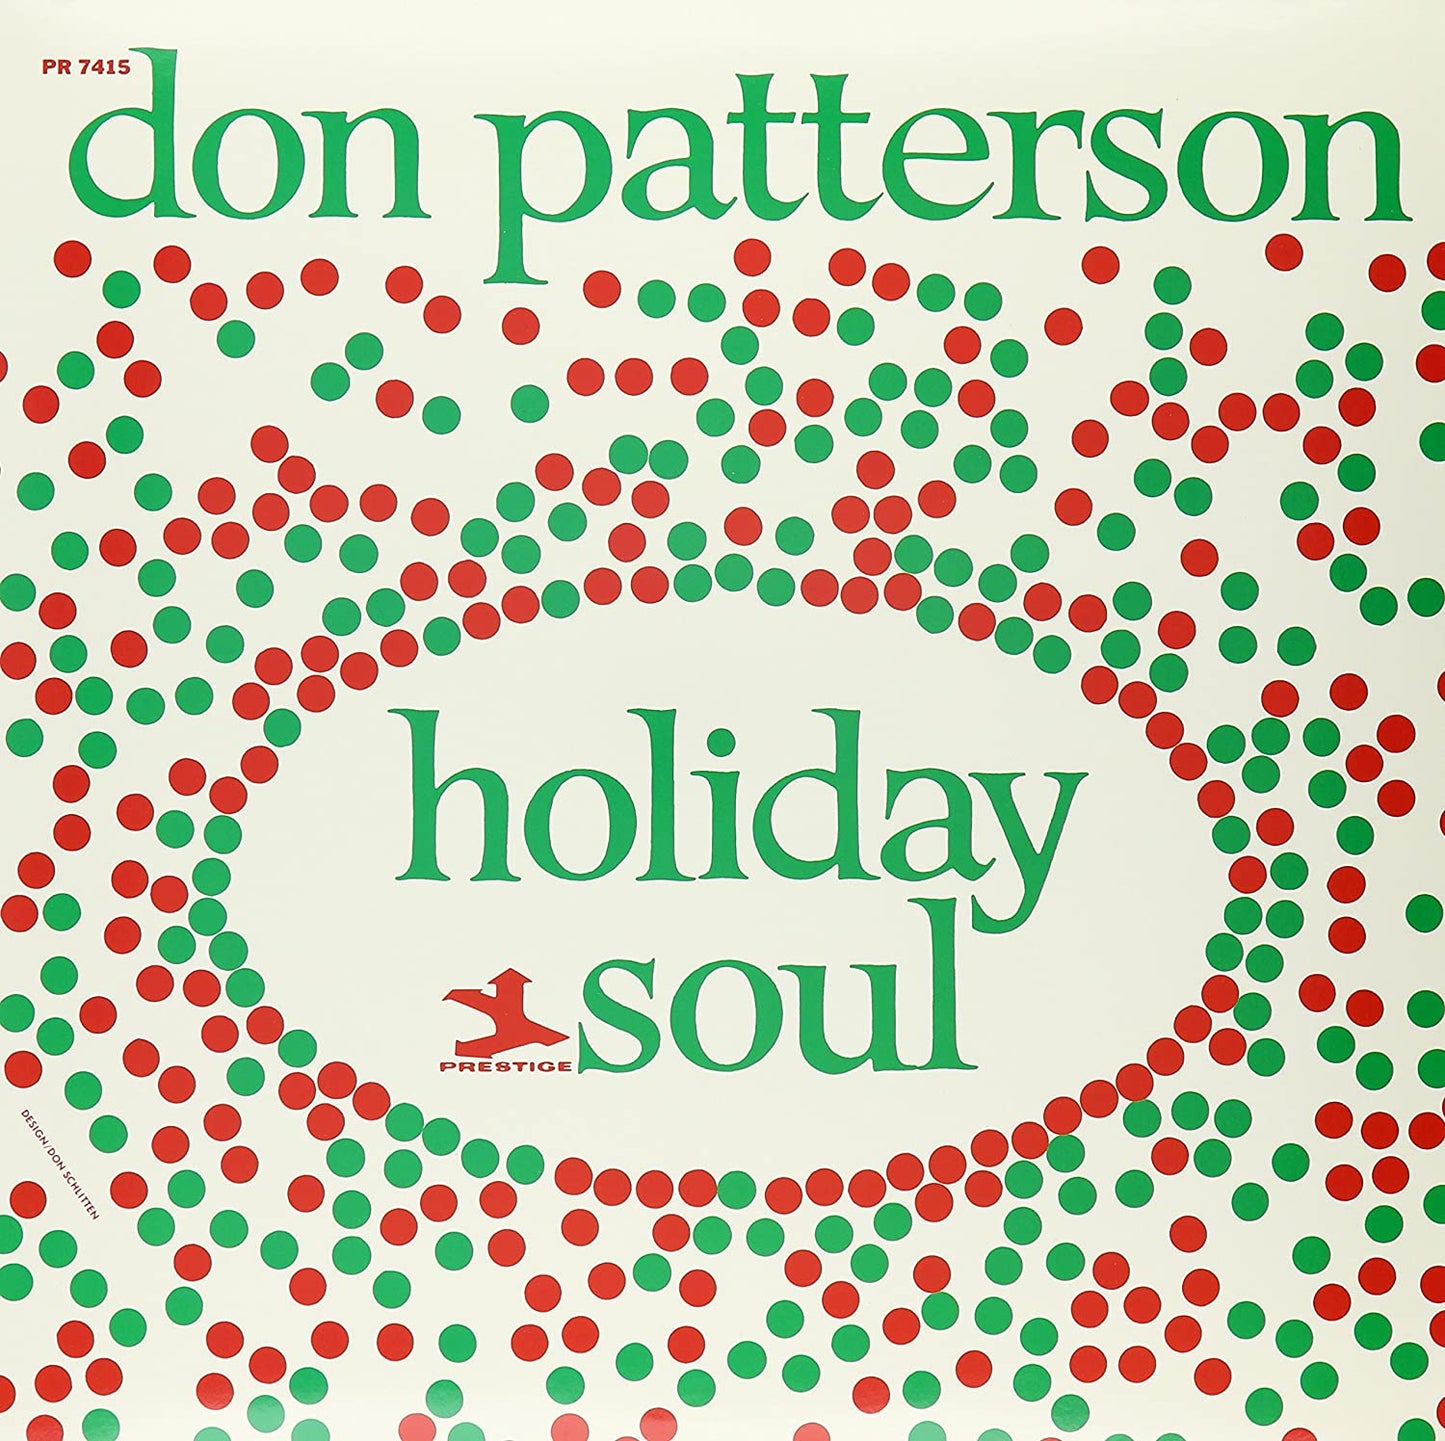 Patterson, Don/Holiday Soul [LP]